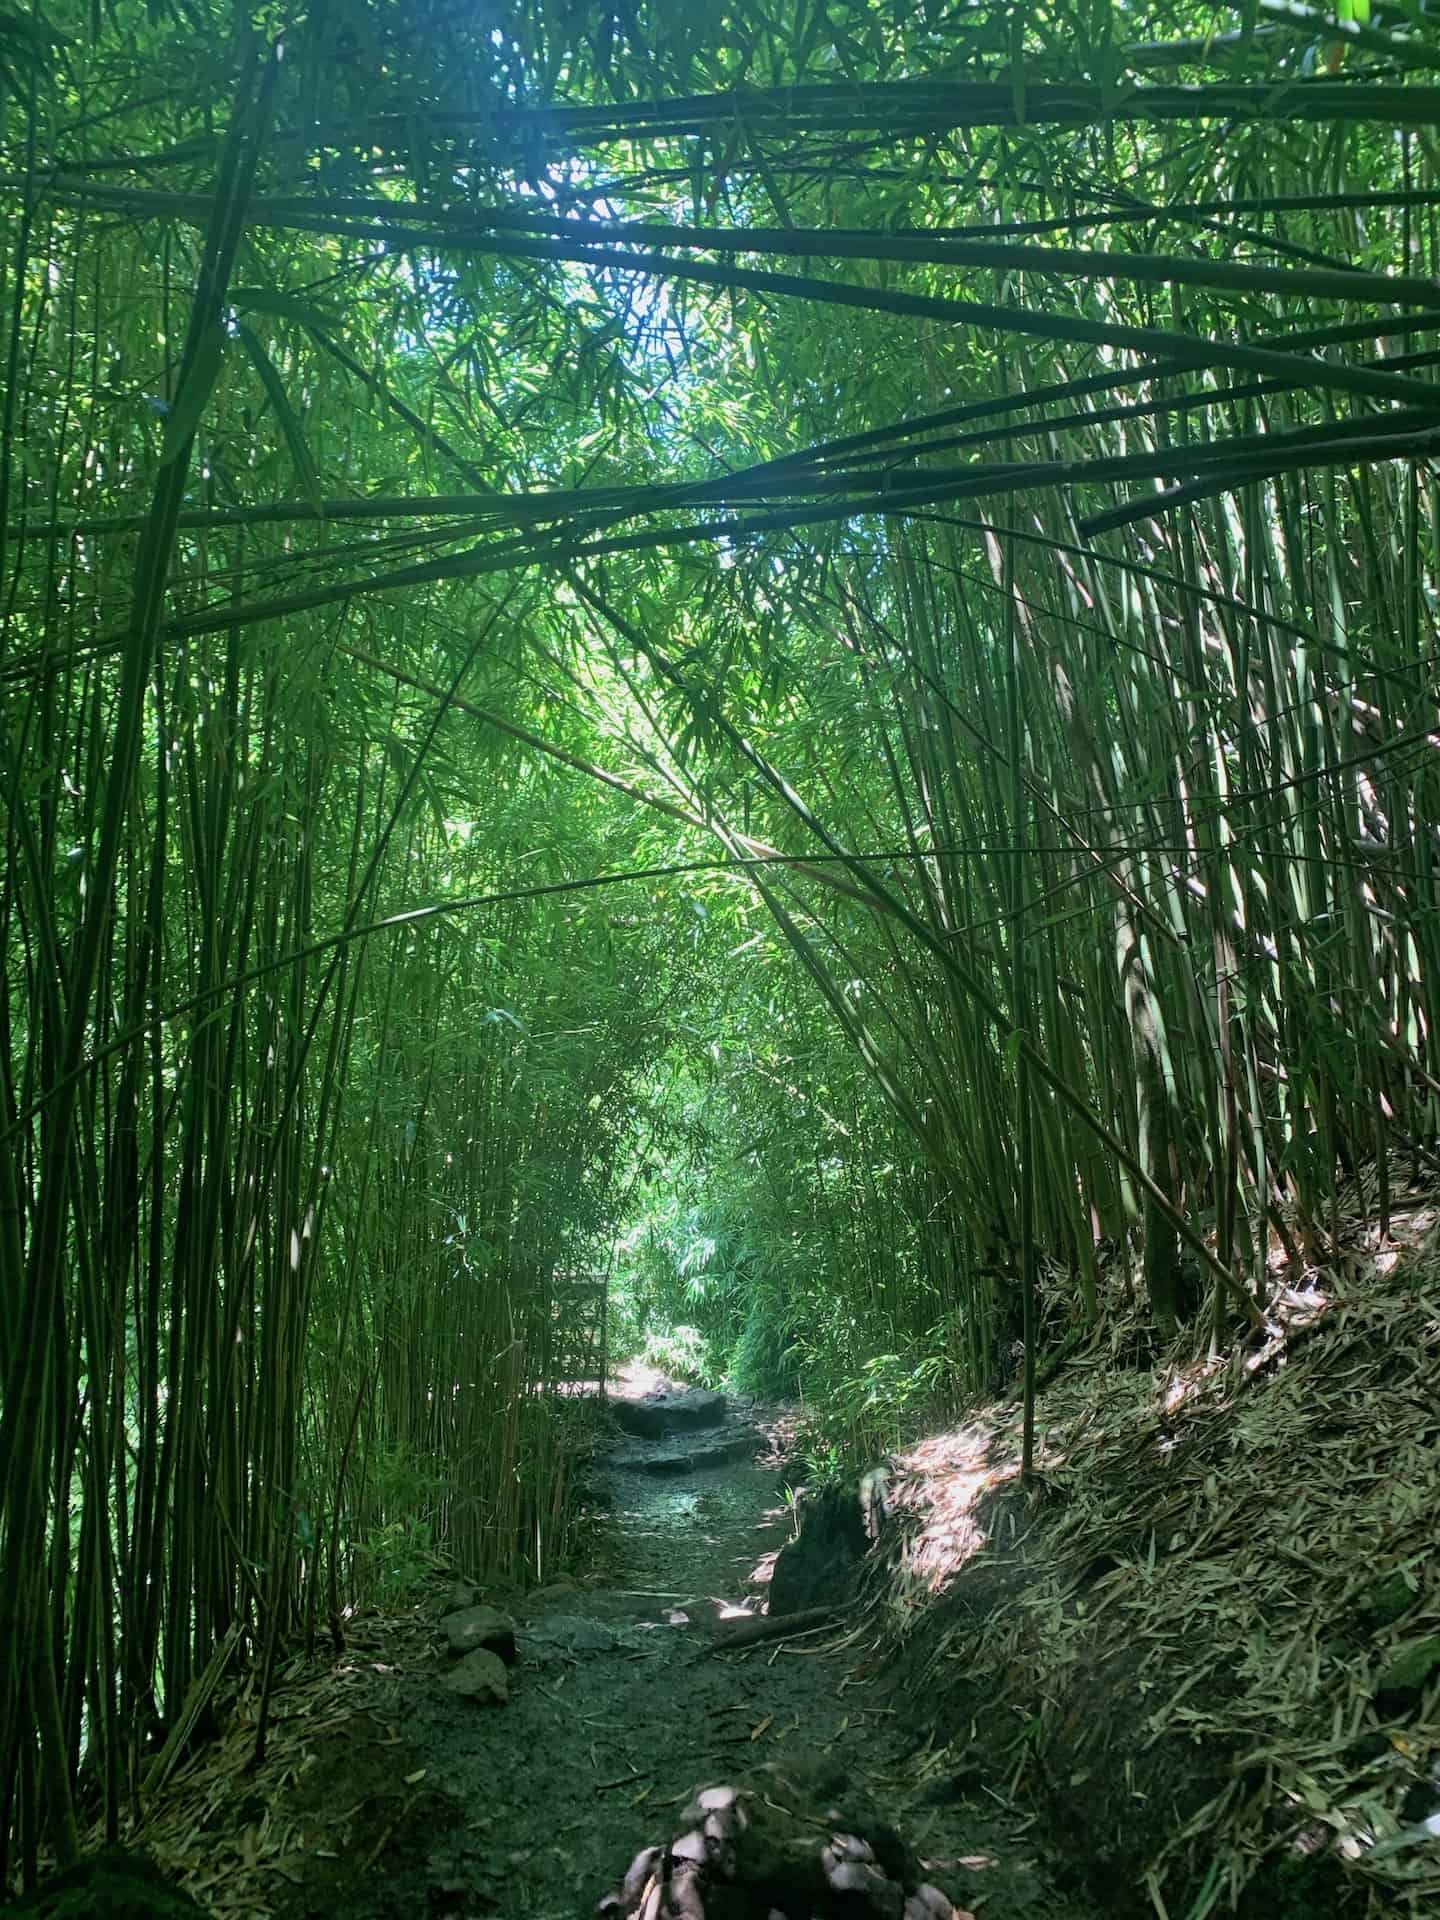 The Pipiwai Trail to Maui's Bamboo Forest